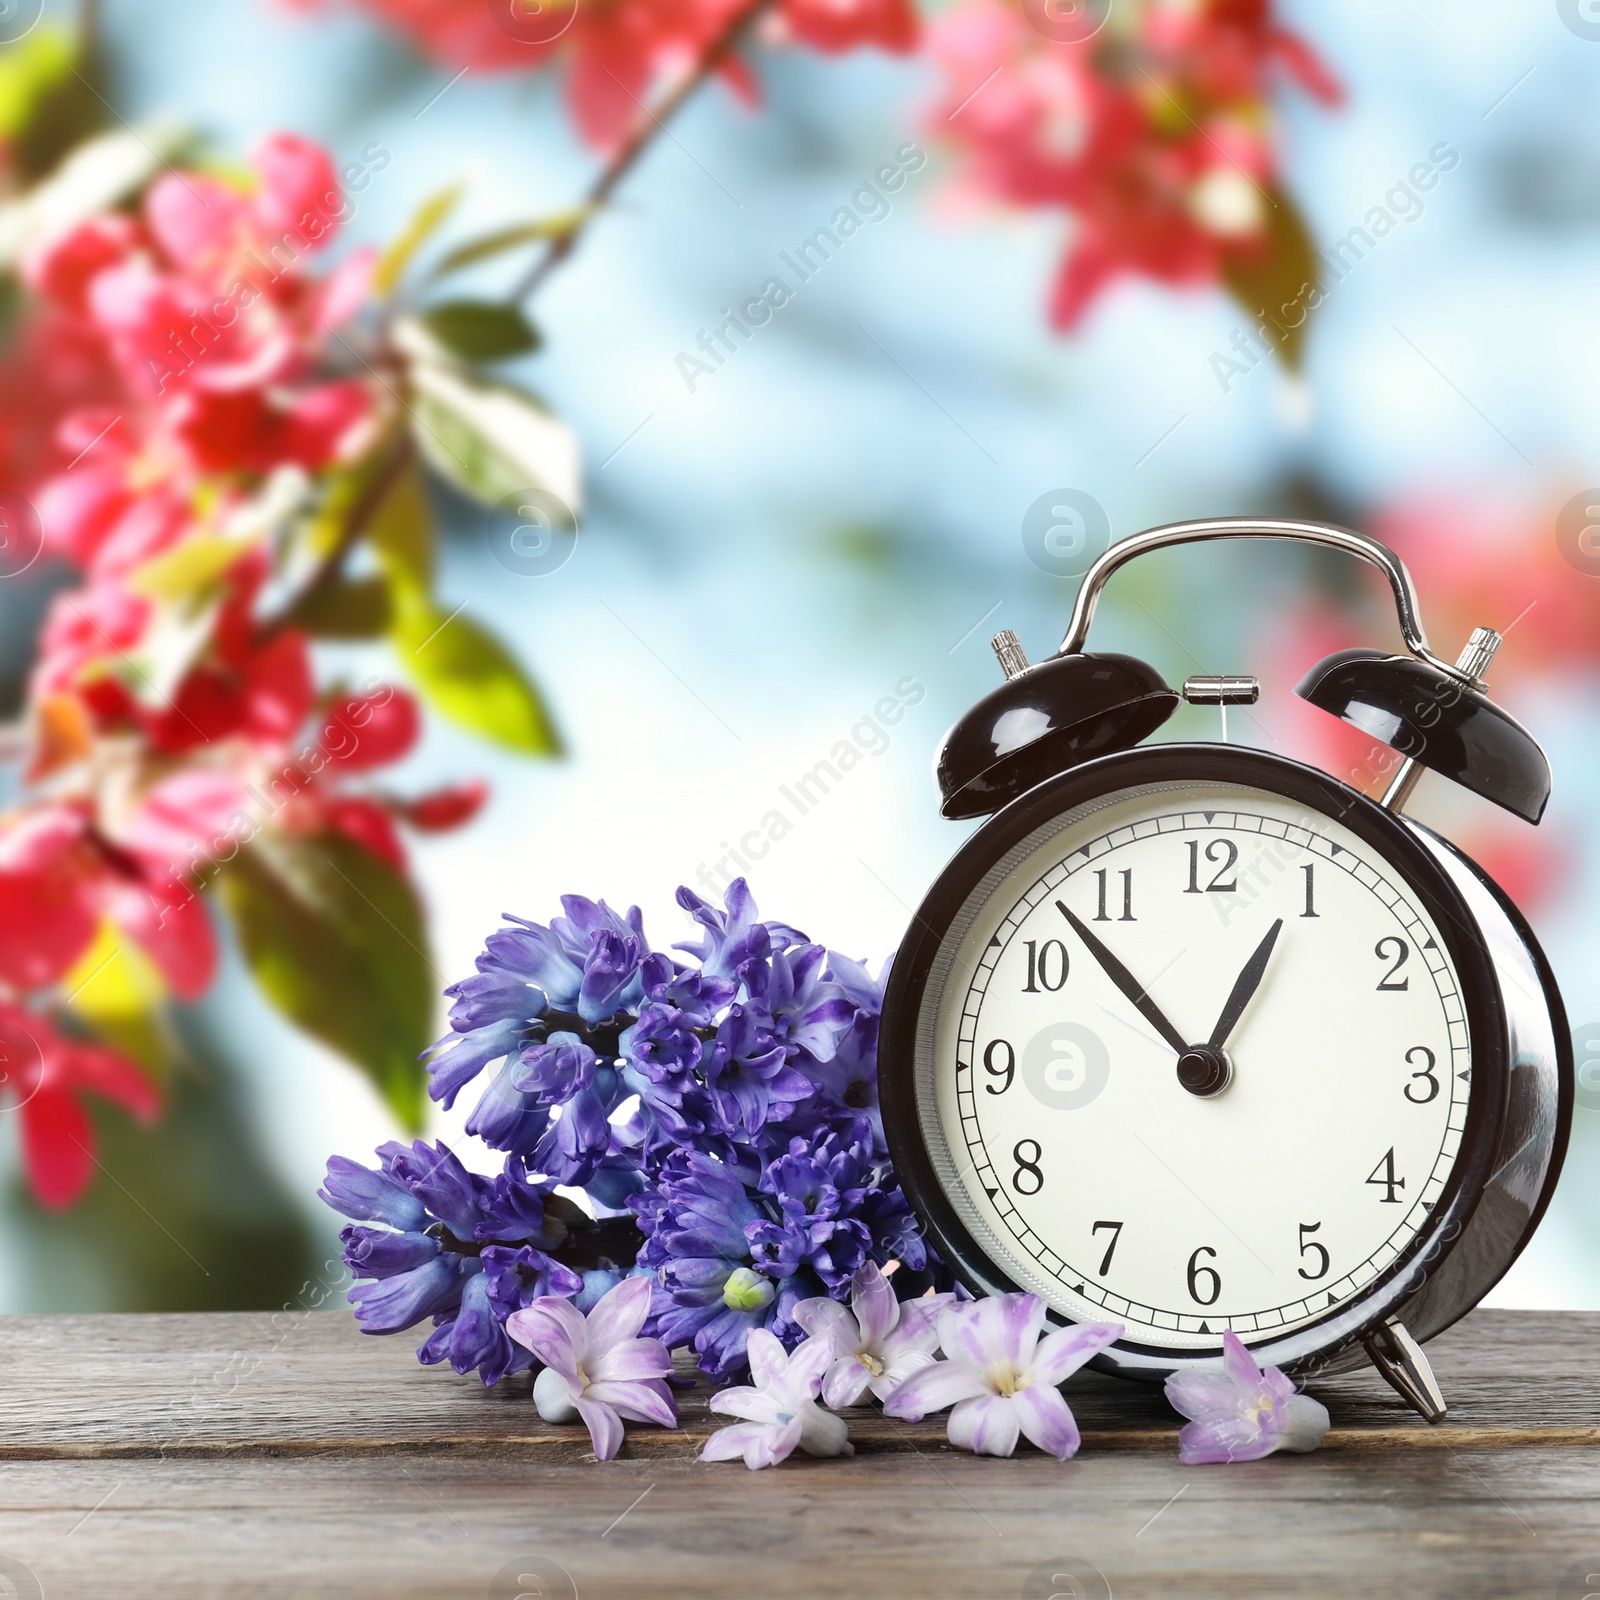 Image of Black alarm clock and flowers on wooden table against blurred background. Spring time